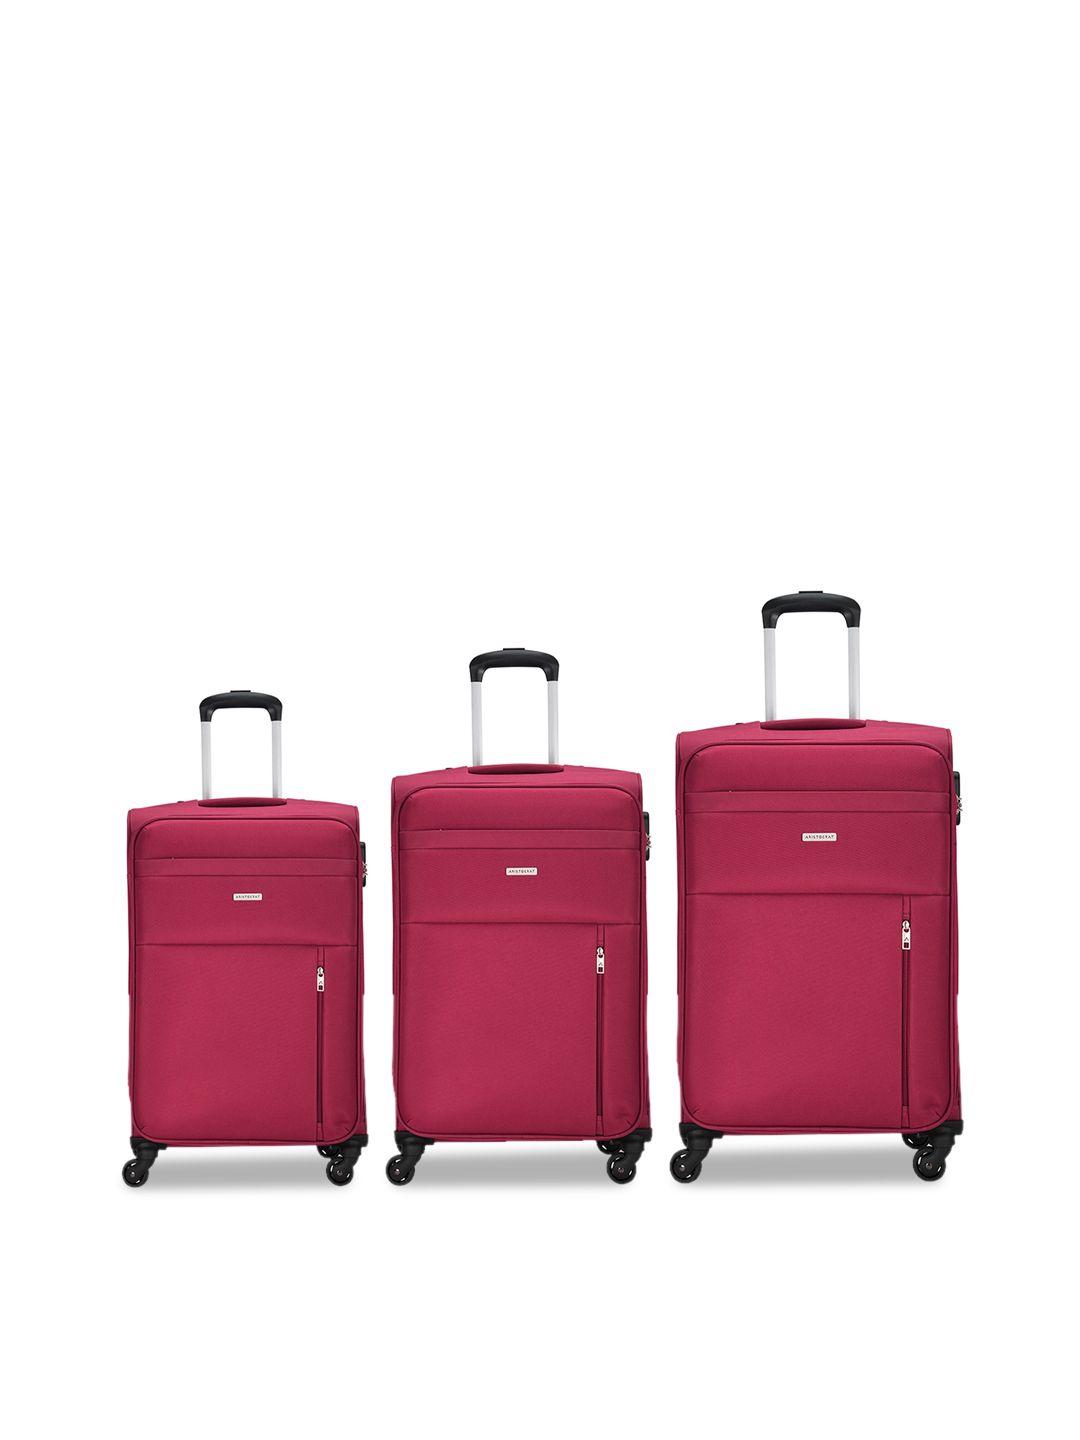 aristocrat set of 3 soft-sided trolley bags